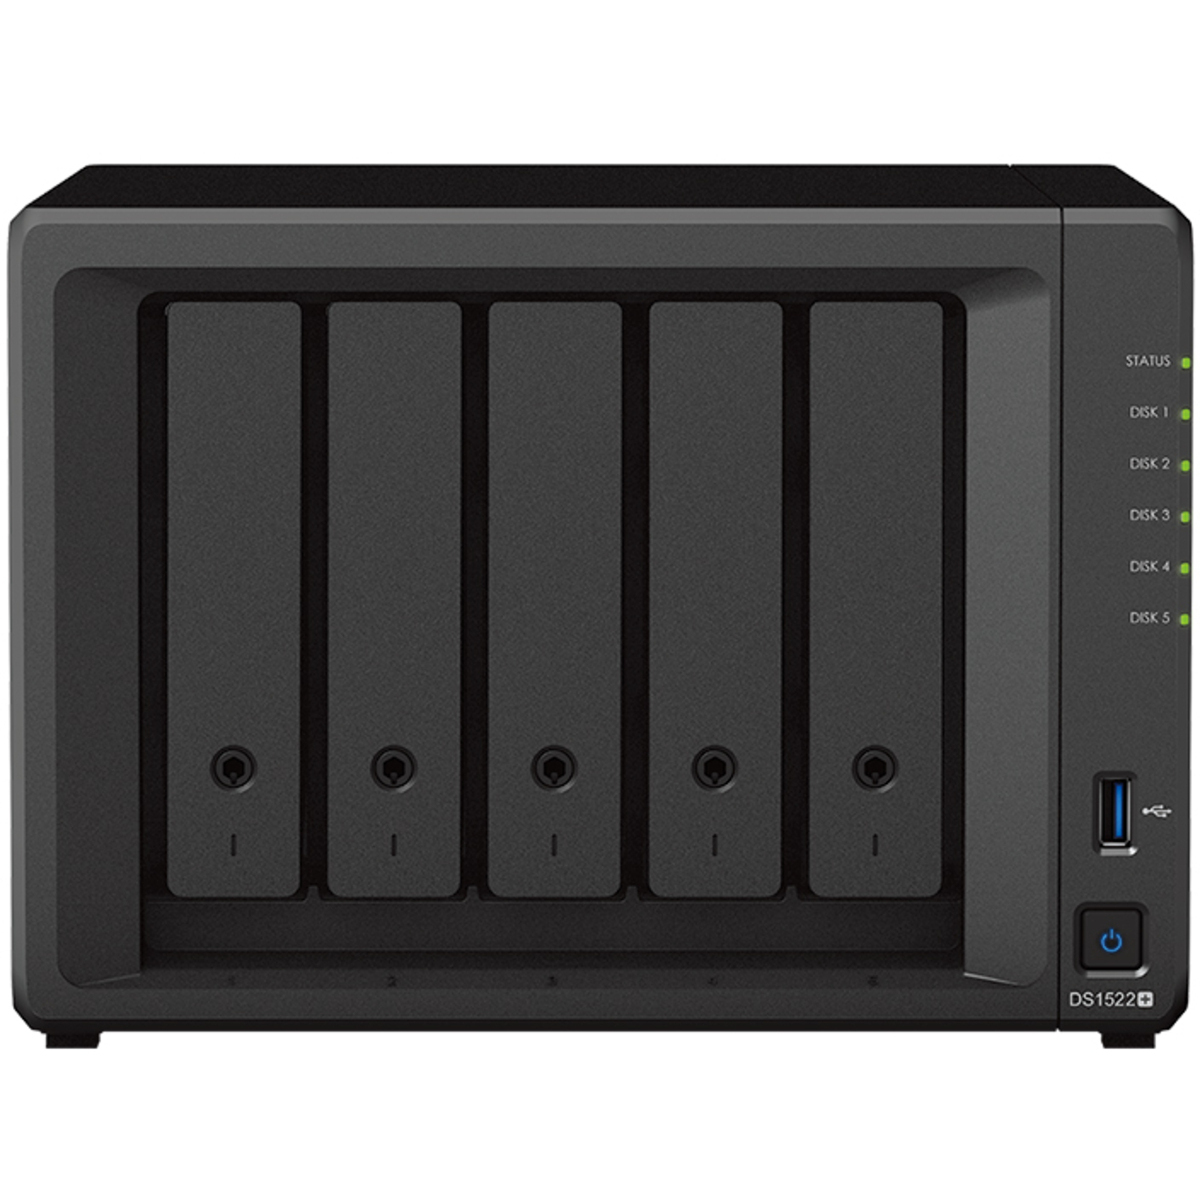 Synology DiskStation DS1522+ 88tb 5-Bay Desktop Multimedia / Power User / Business NAS - Network Attached Storage Device 4x22tb Seagate IronWolf Pro ST22000NT001 3.5 7200rpm SATA 6Gb/s HDD NAS Class Drives Installed - Burn-In Tested - ON SALE DiskStation DS1522+